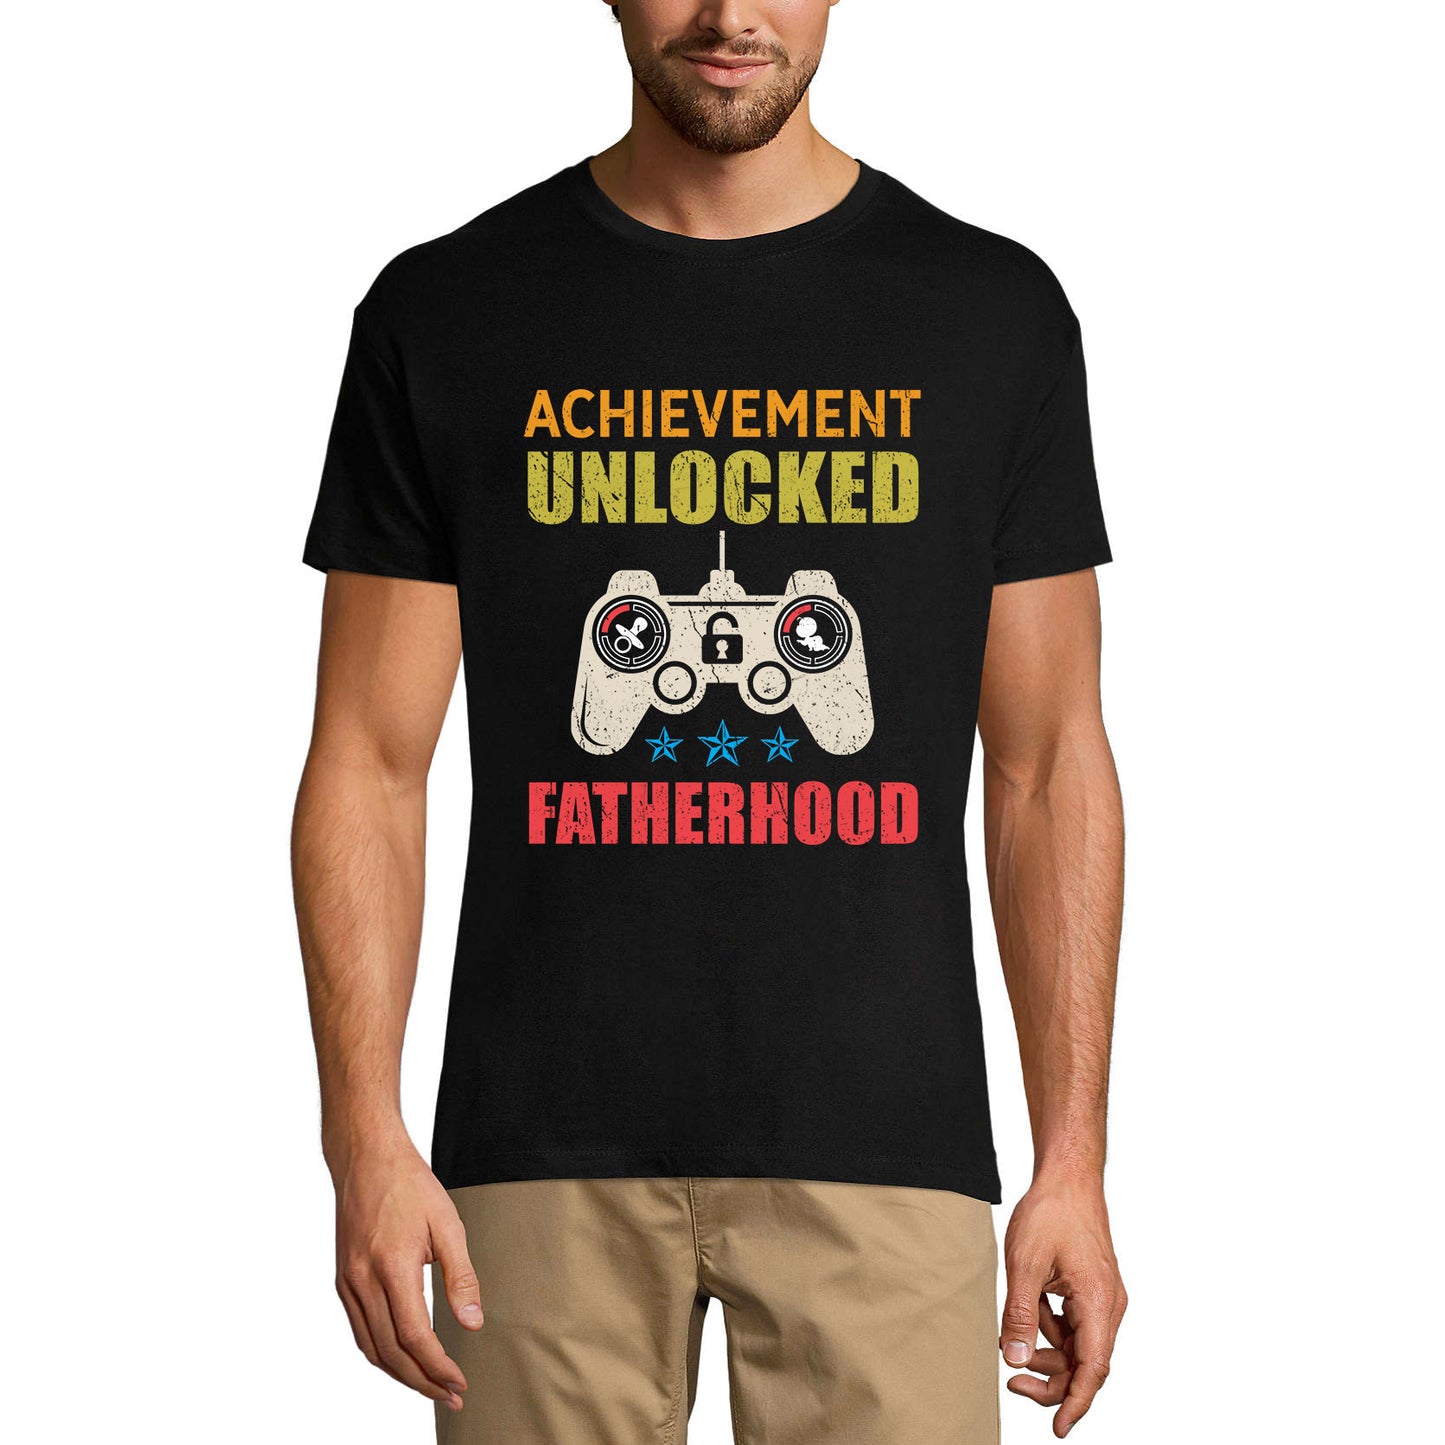 ULTRABASIC Men's Graphic T-Shirt Achievment Unlocked Fatherhood - Gift for Father's Day